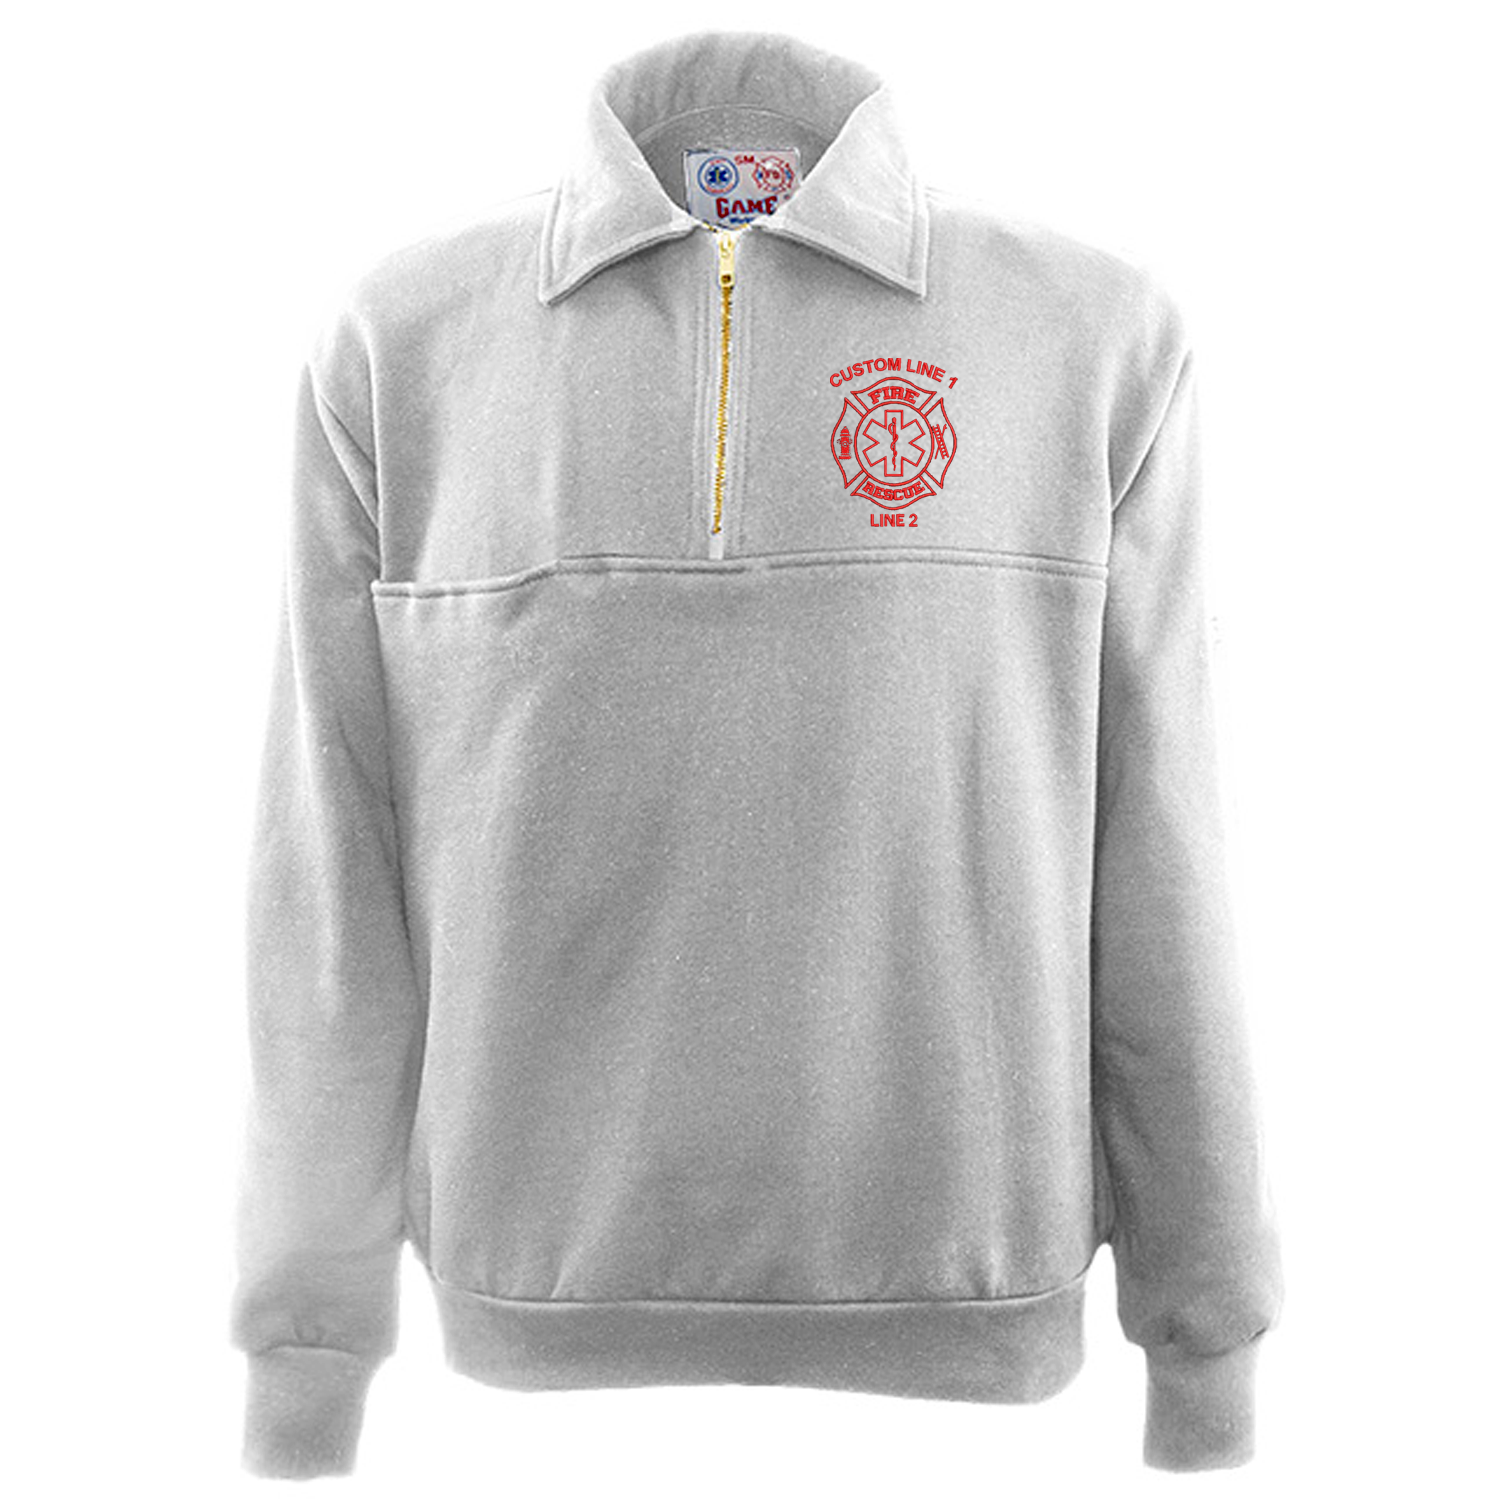 Image of Customized Game 3/4 Zip Job Shirt with Fire Rescue Embroidery